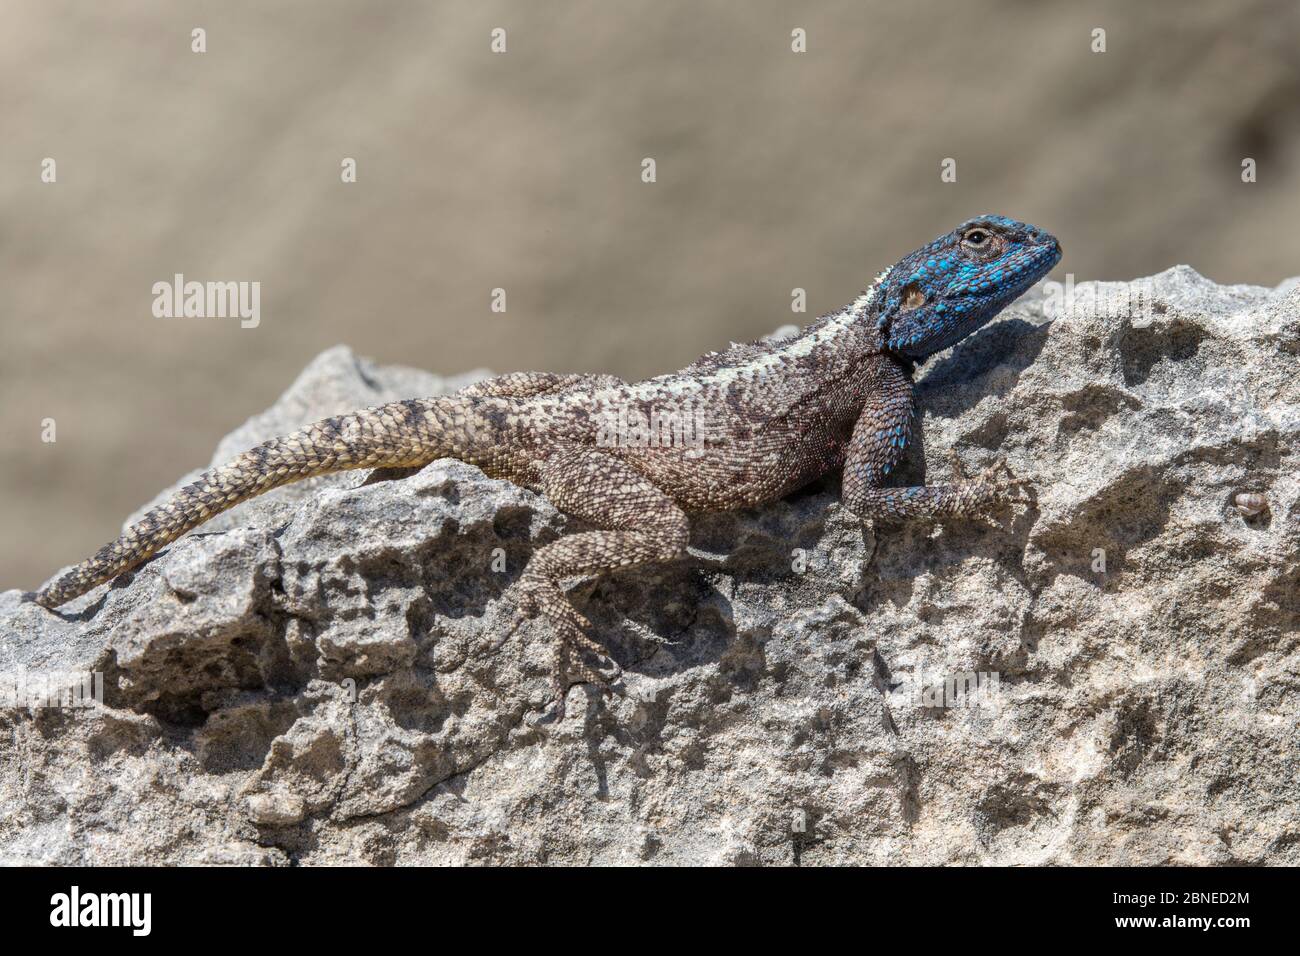 Southern rock agama (Agama atra), De Hoop Nature Reserve, Western Cape, South Africa Stock Photo